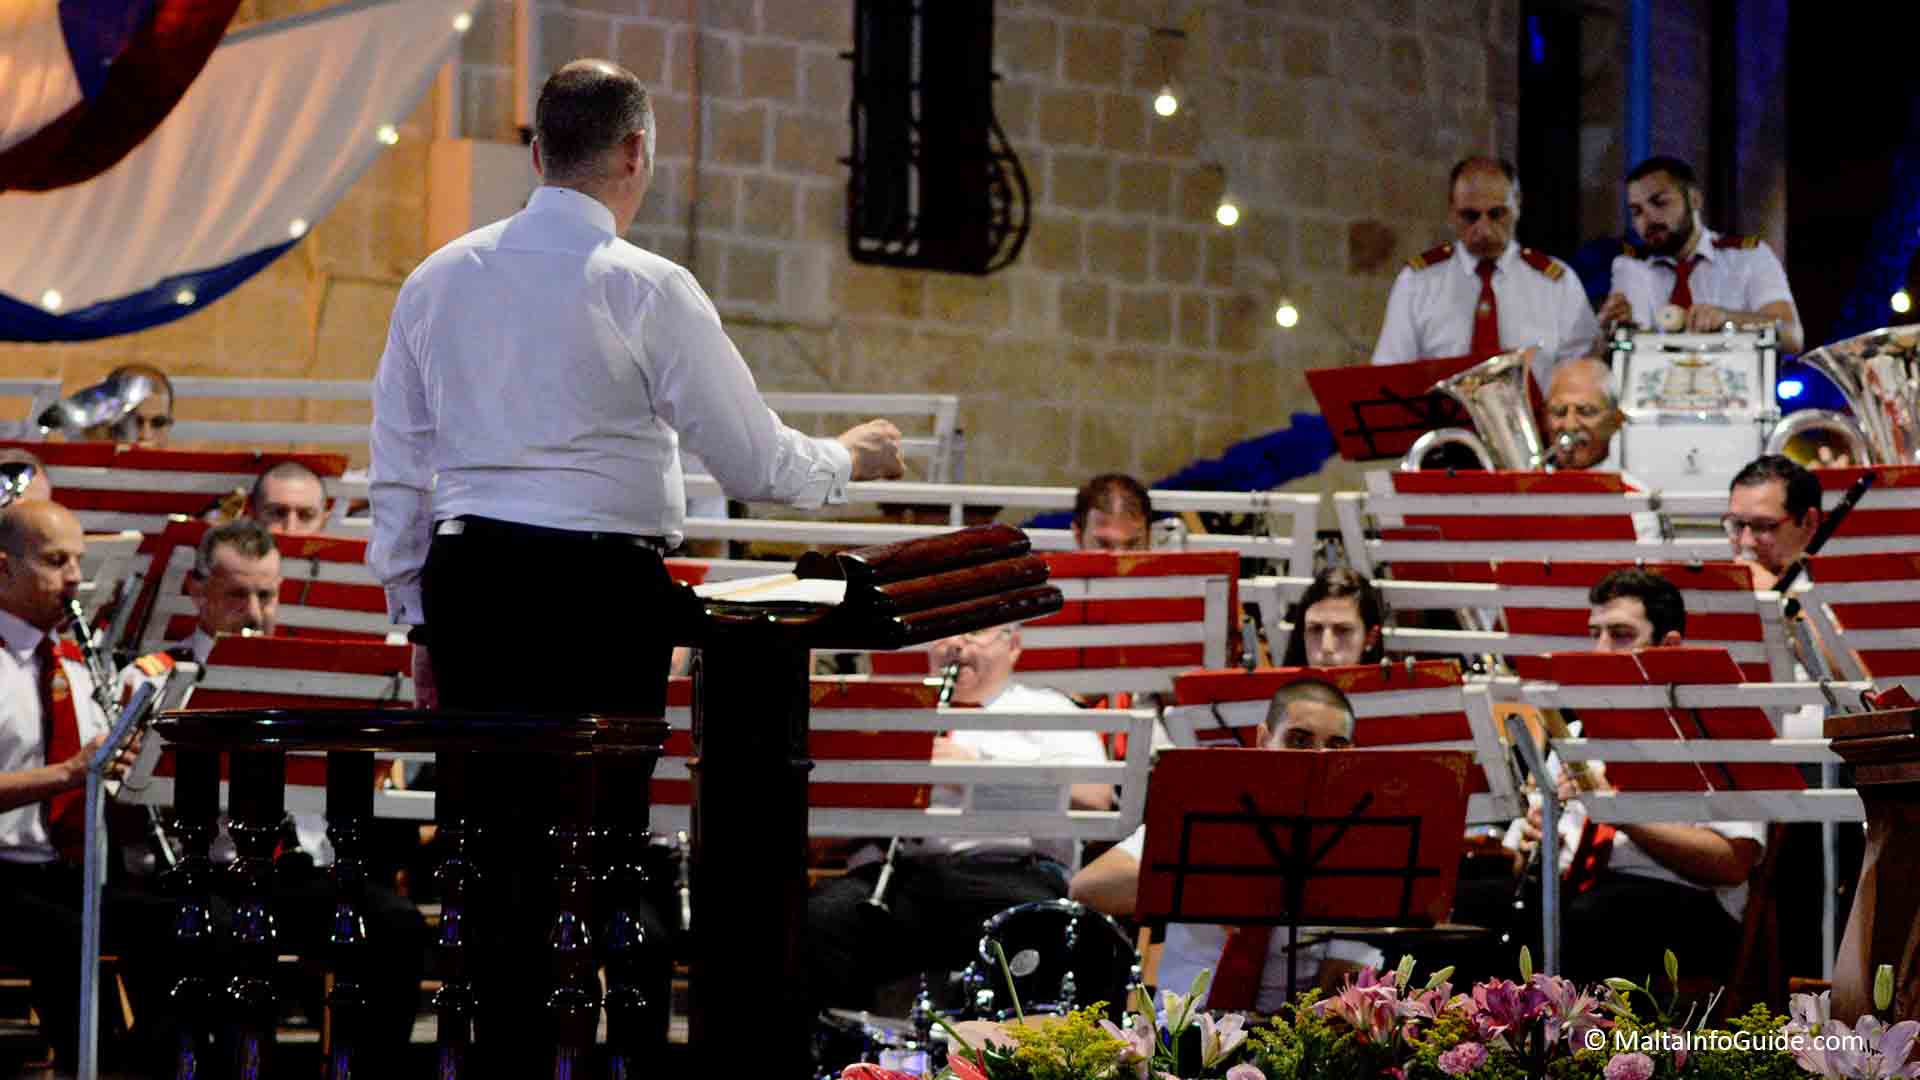 Musicians playing during a feast